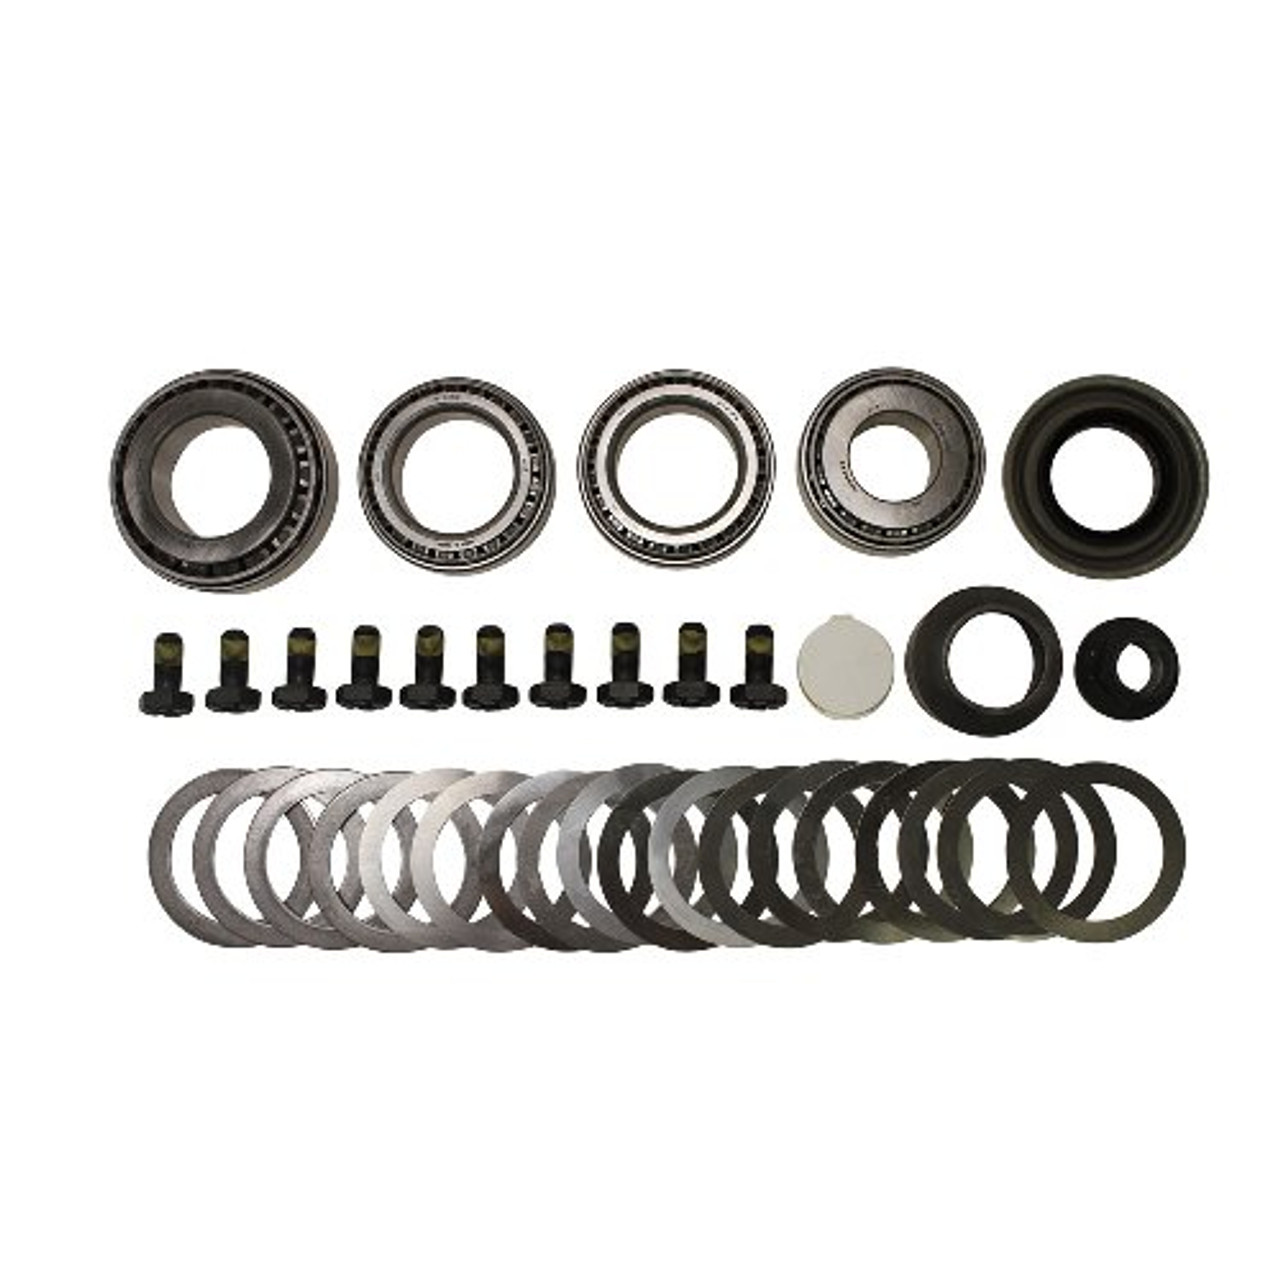 Ford Performance 2015-2021 Super 8.8" IRS Ring and Pinion Installation Kit M-4210-B3